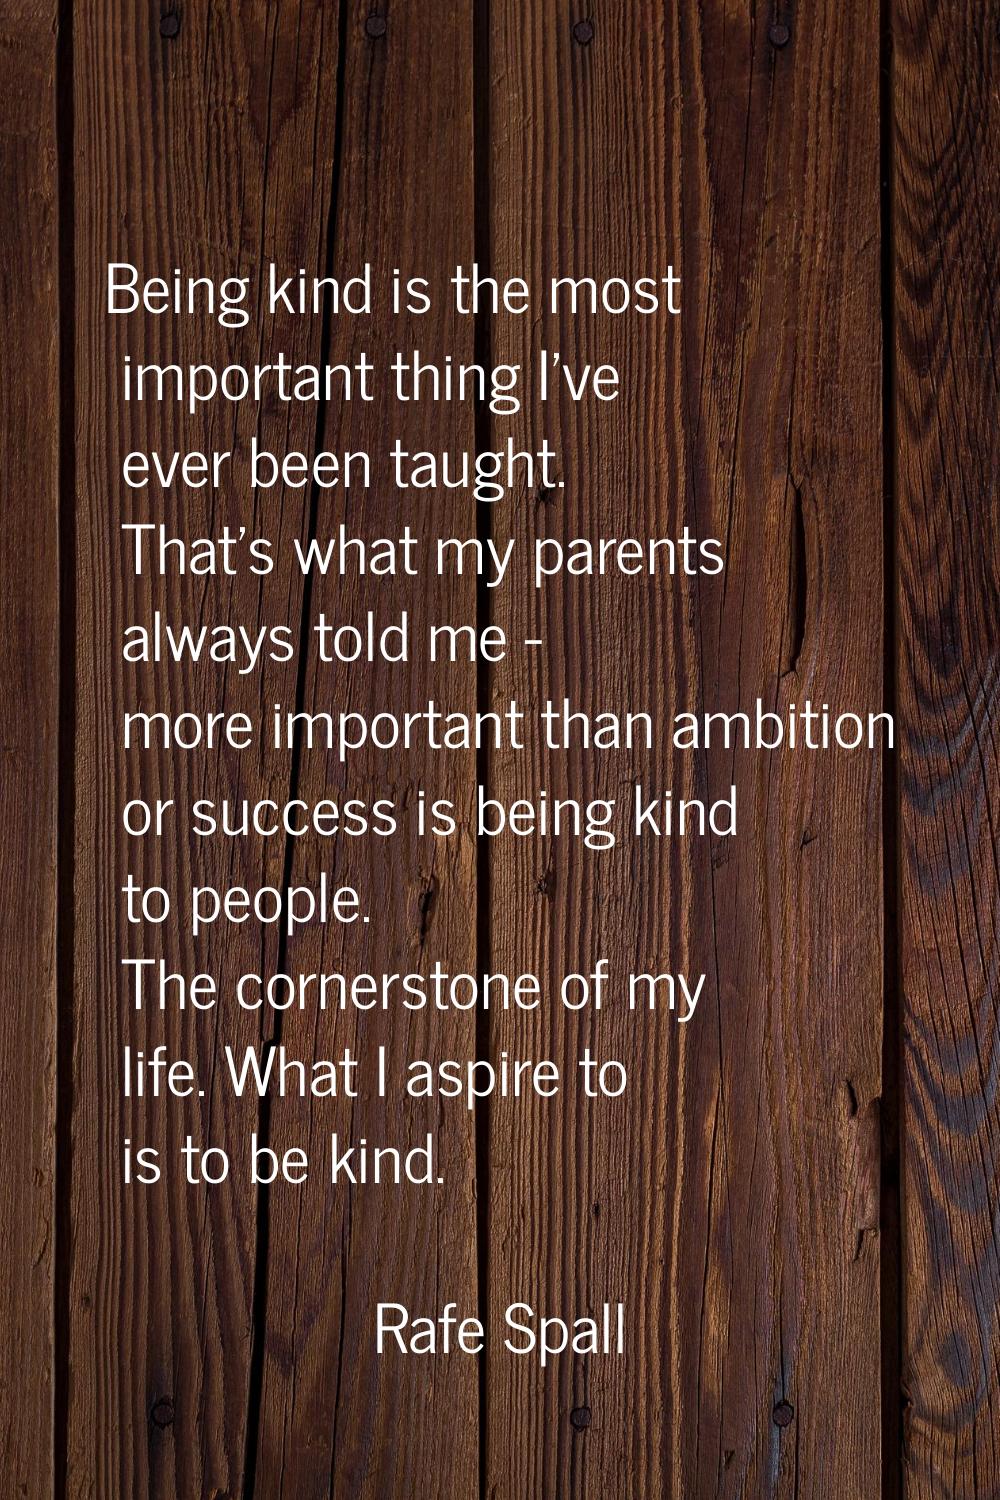 Being kind is the most important thing I've ever been taught. That's what my parents always told me